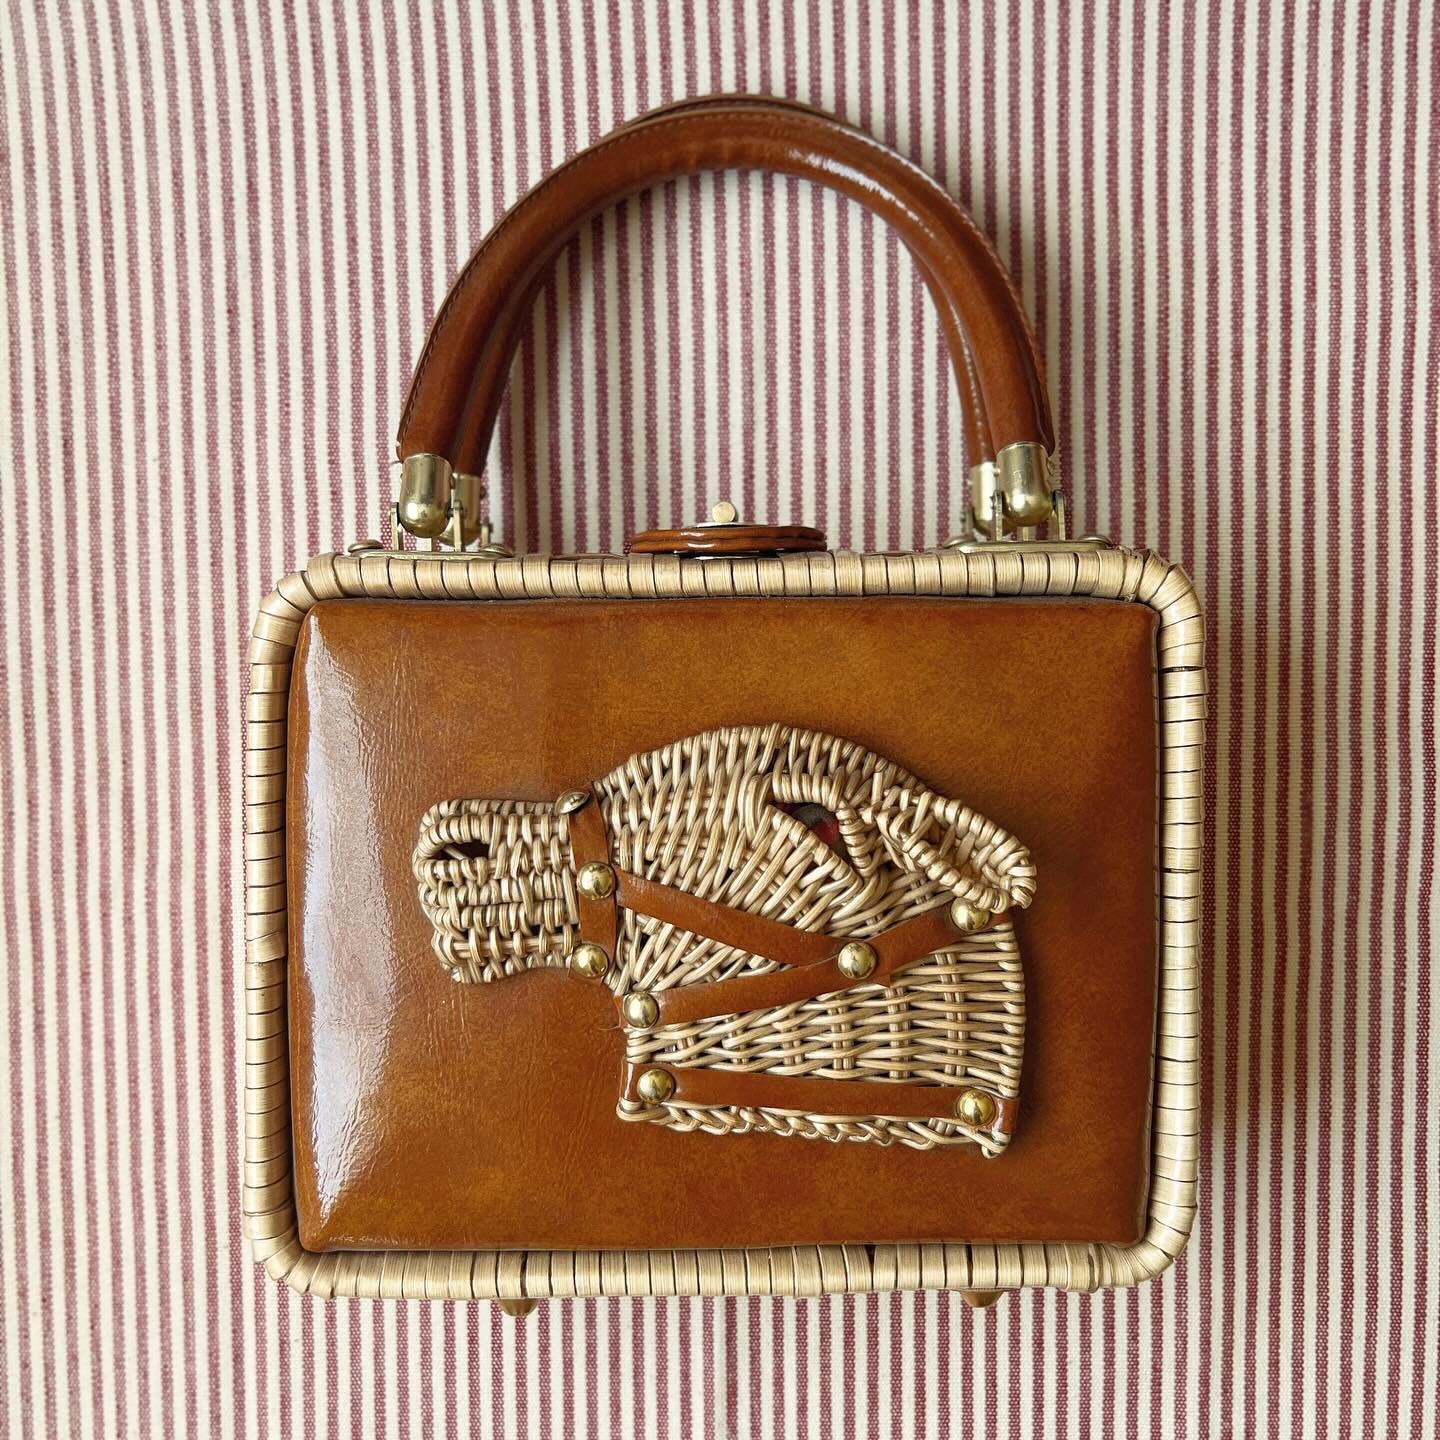 Off to the races! 🏇 If you&rsquo;d like to win best dressed at The Kentucky Derby, then head over to the website for this rare horse purse. It is quite difficult to find a vintage handbag that fits modern-day accessories (looking at you, iPhones!), 